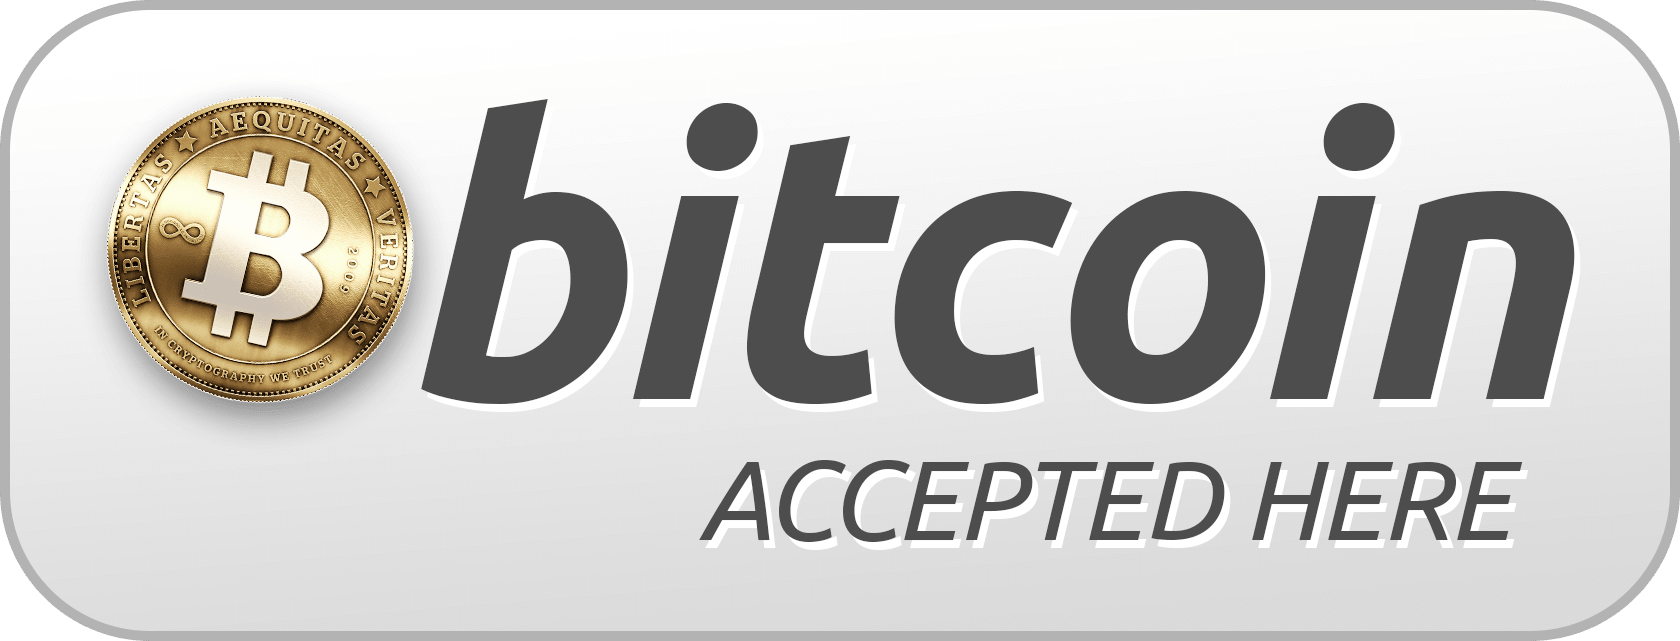 auckland photographer now accepting payment in bitcoin.